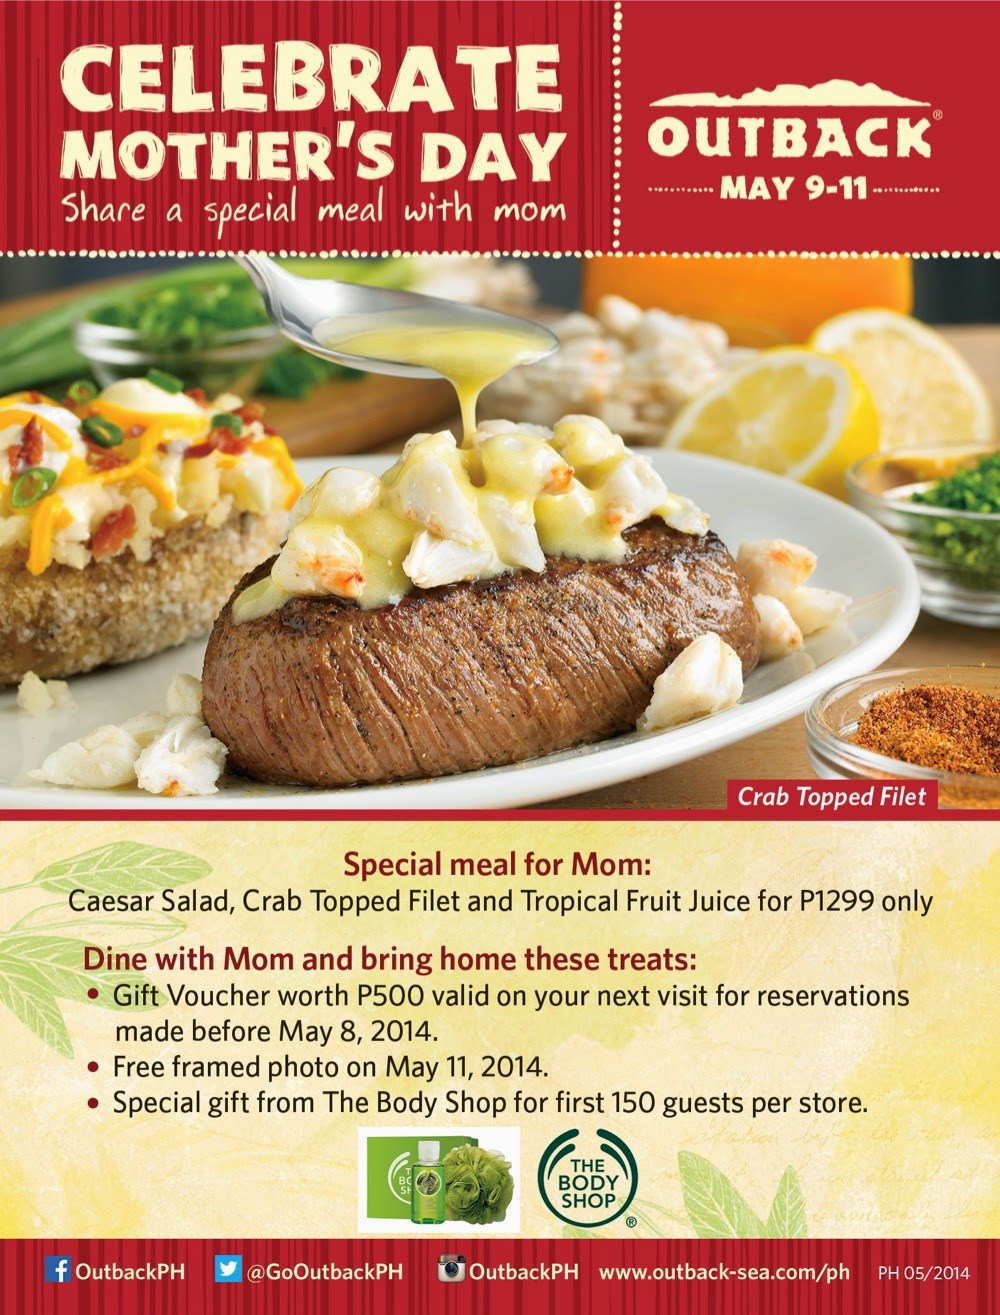 Celebrate Mother's Day at Outback Steakhouse - The Food Scout